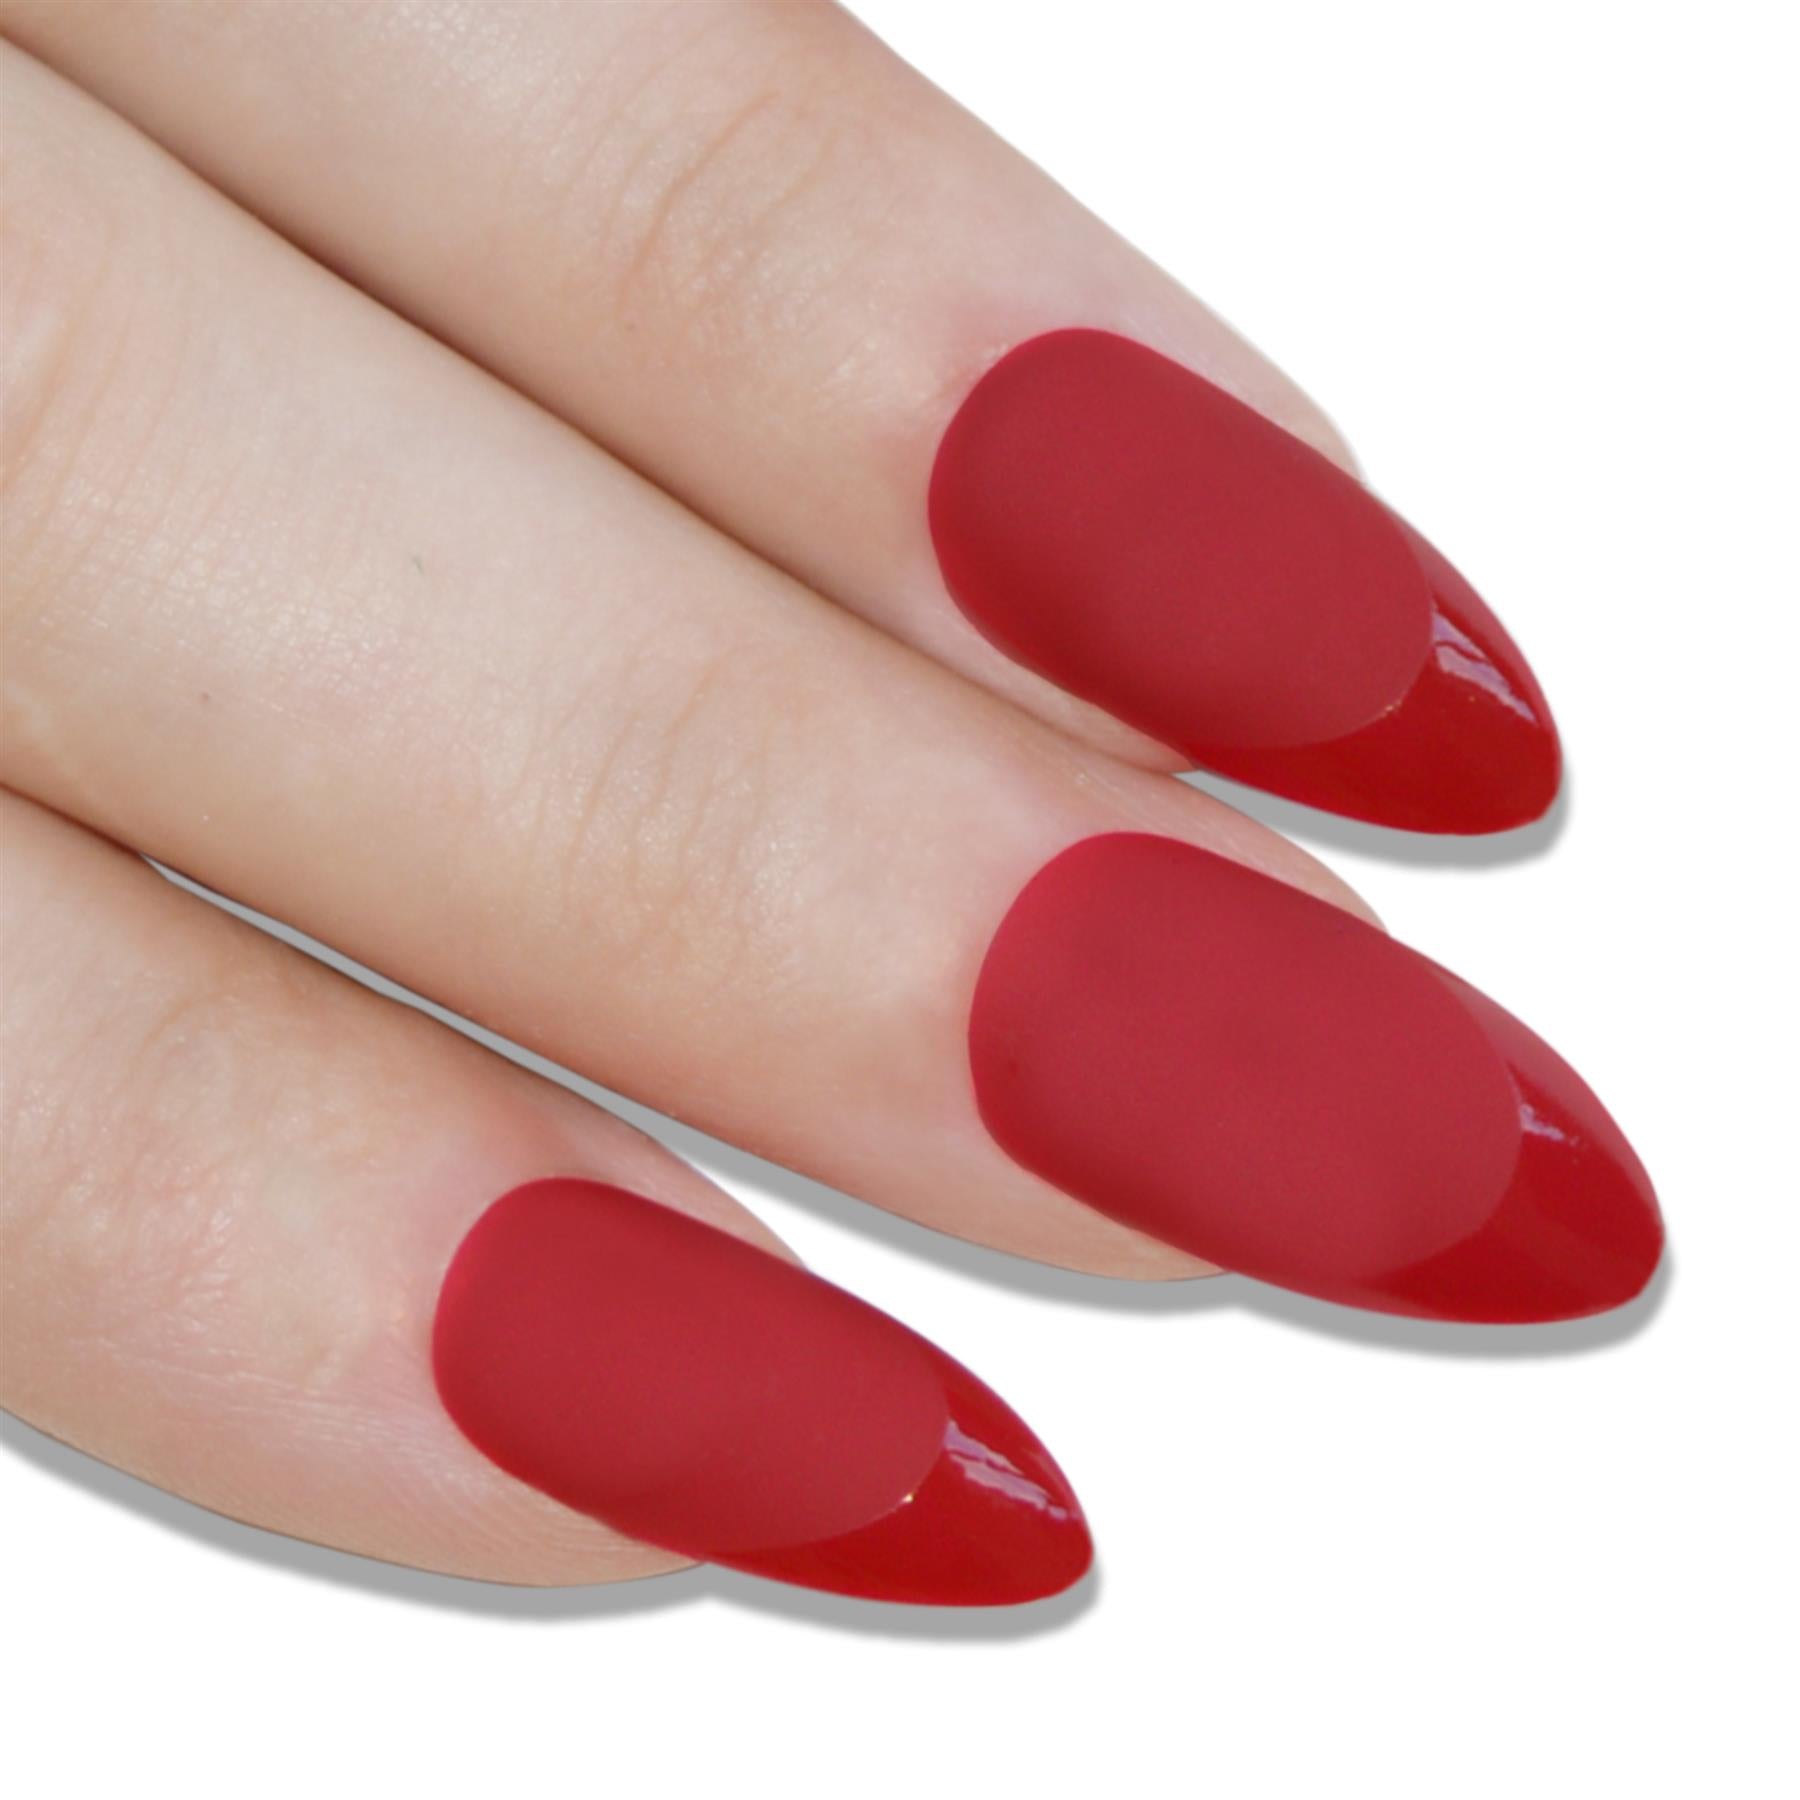 False Nails Bling Art Red Matte Almond Stiletto Long Fake Acrylic Tips with Glue